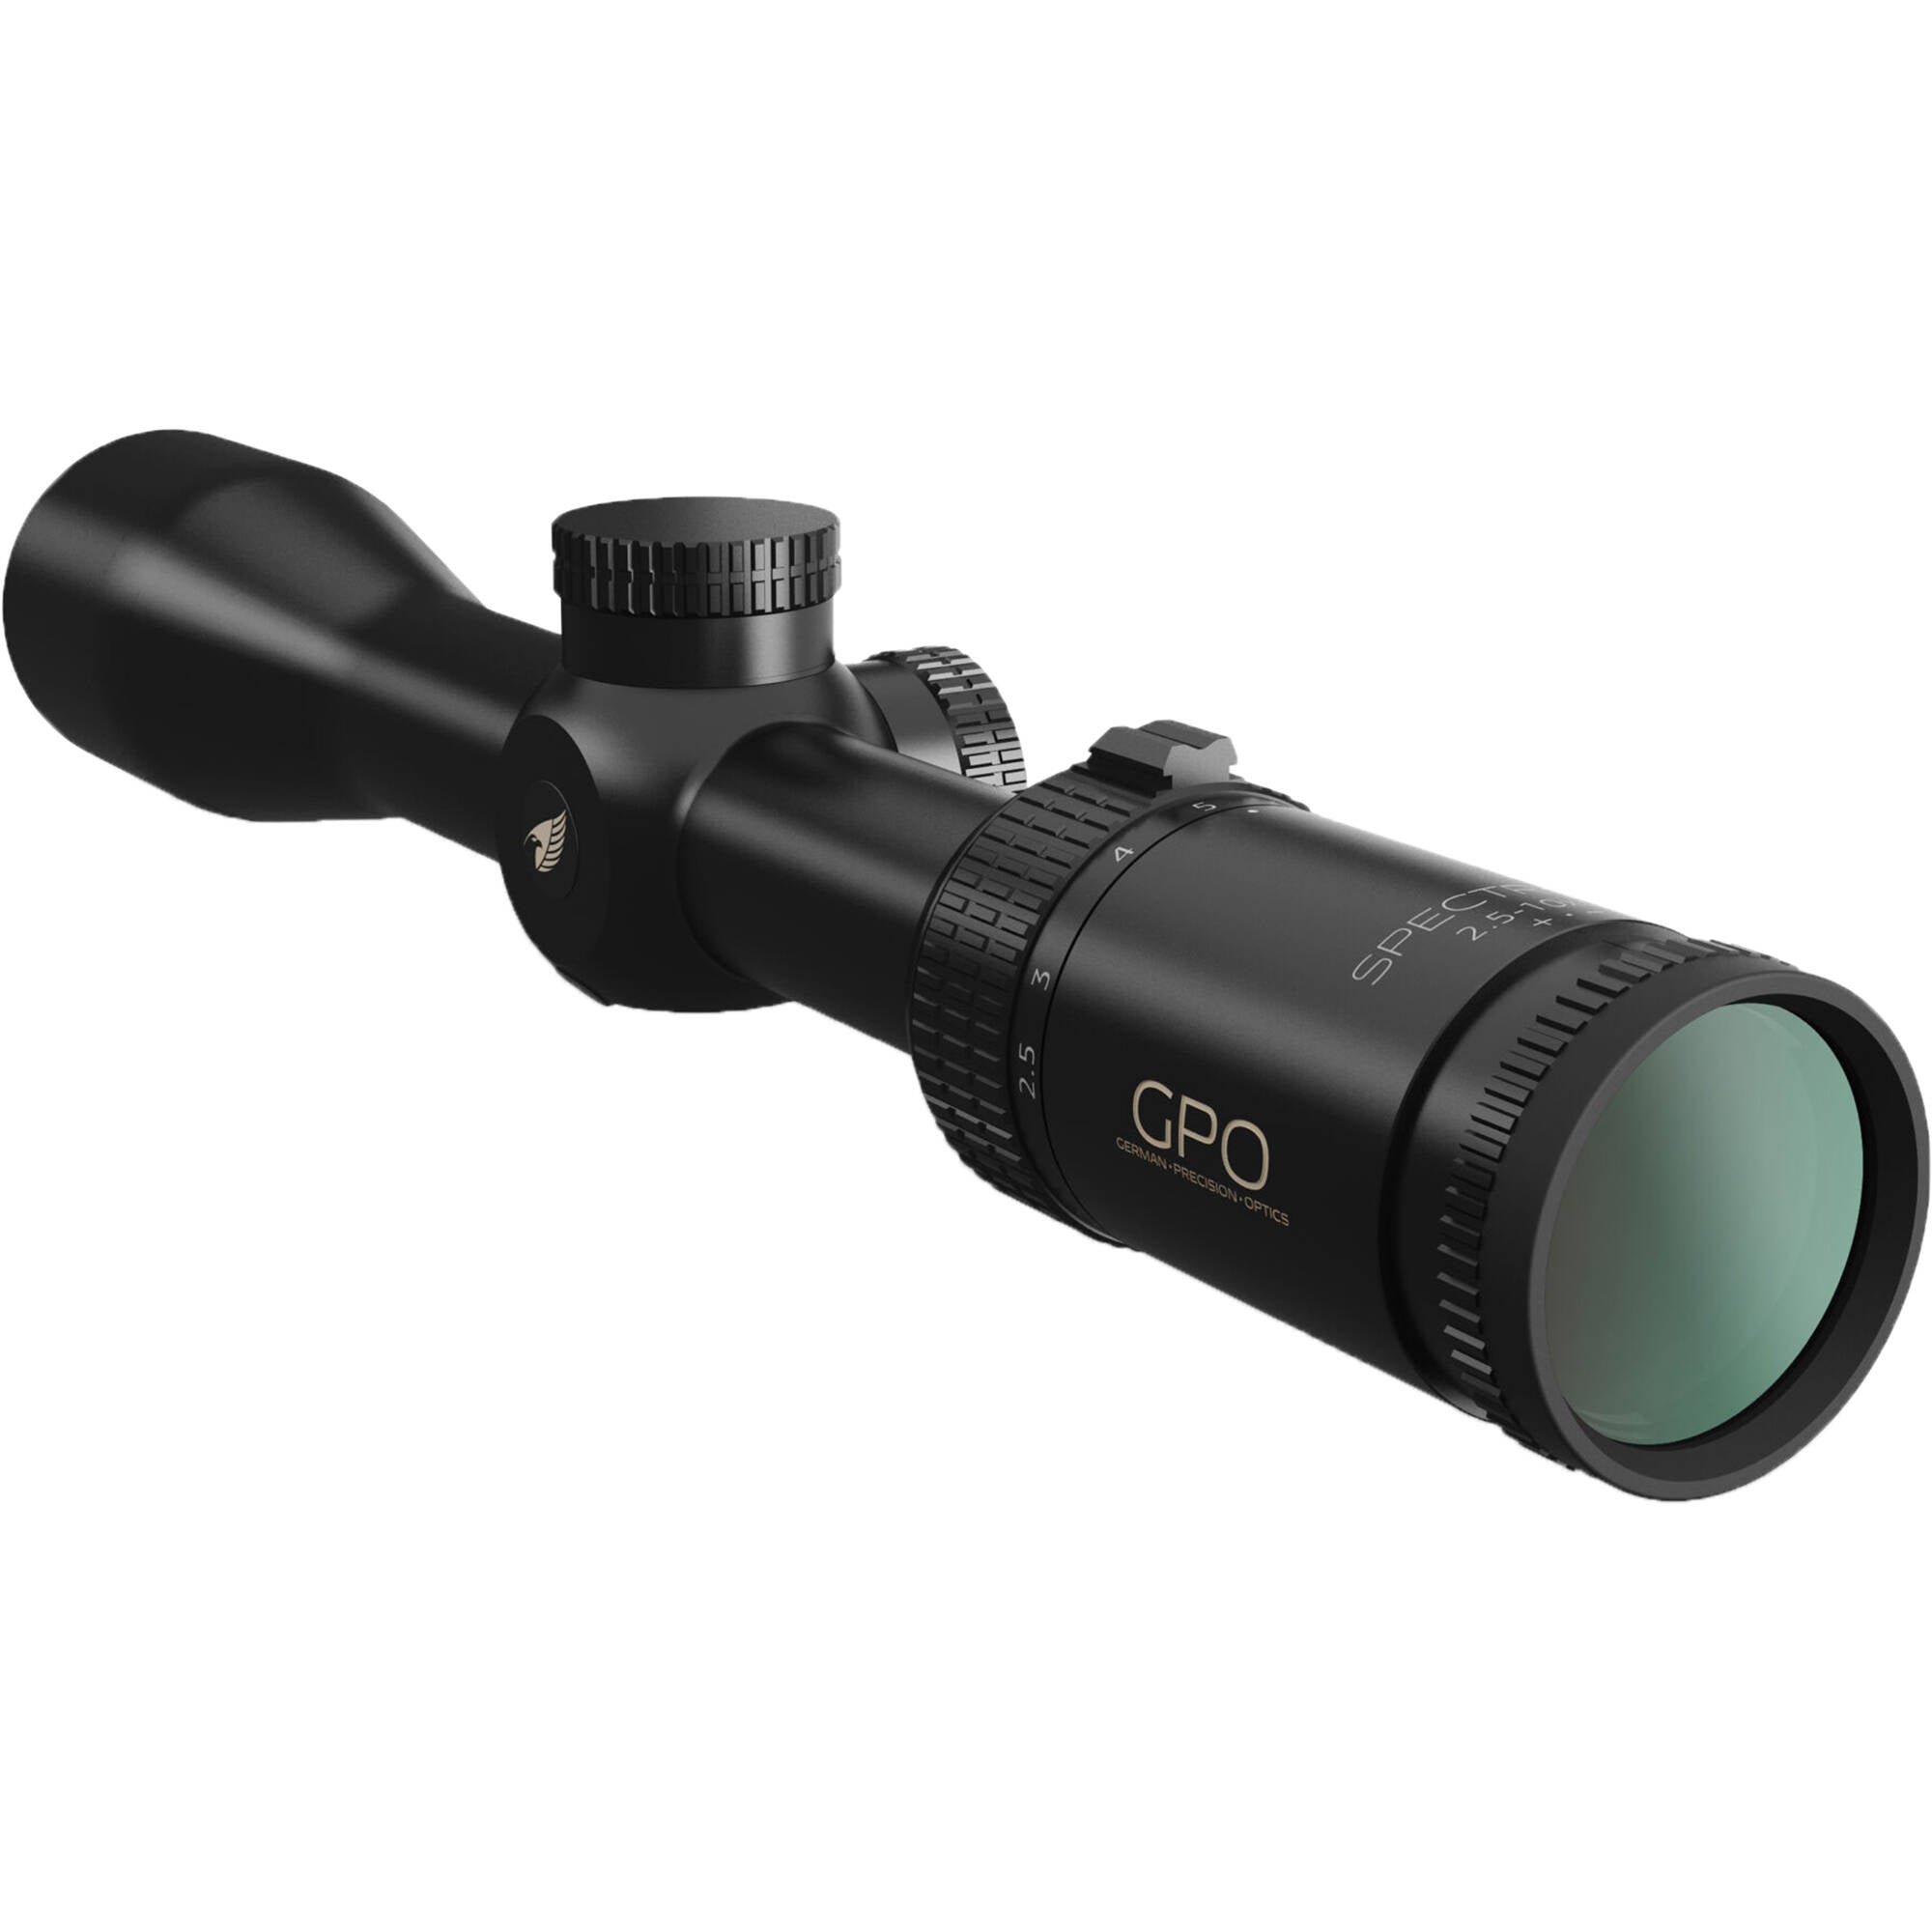 GPO Spectra 4x 2.5-10x44 G4 Reticle Scope -  - Mansfield Hunting & Fishing - Products to prepare for Corona Virus